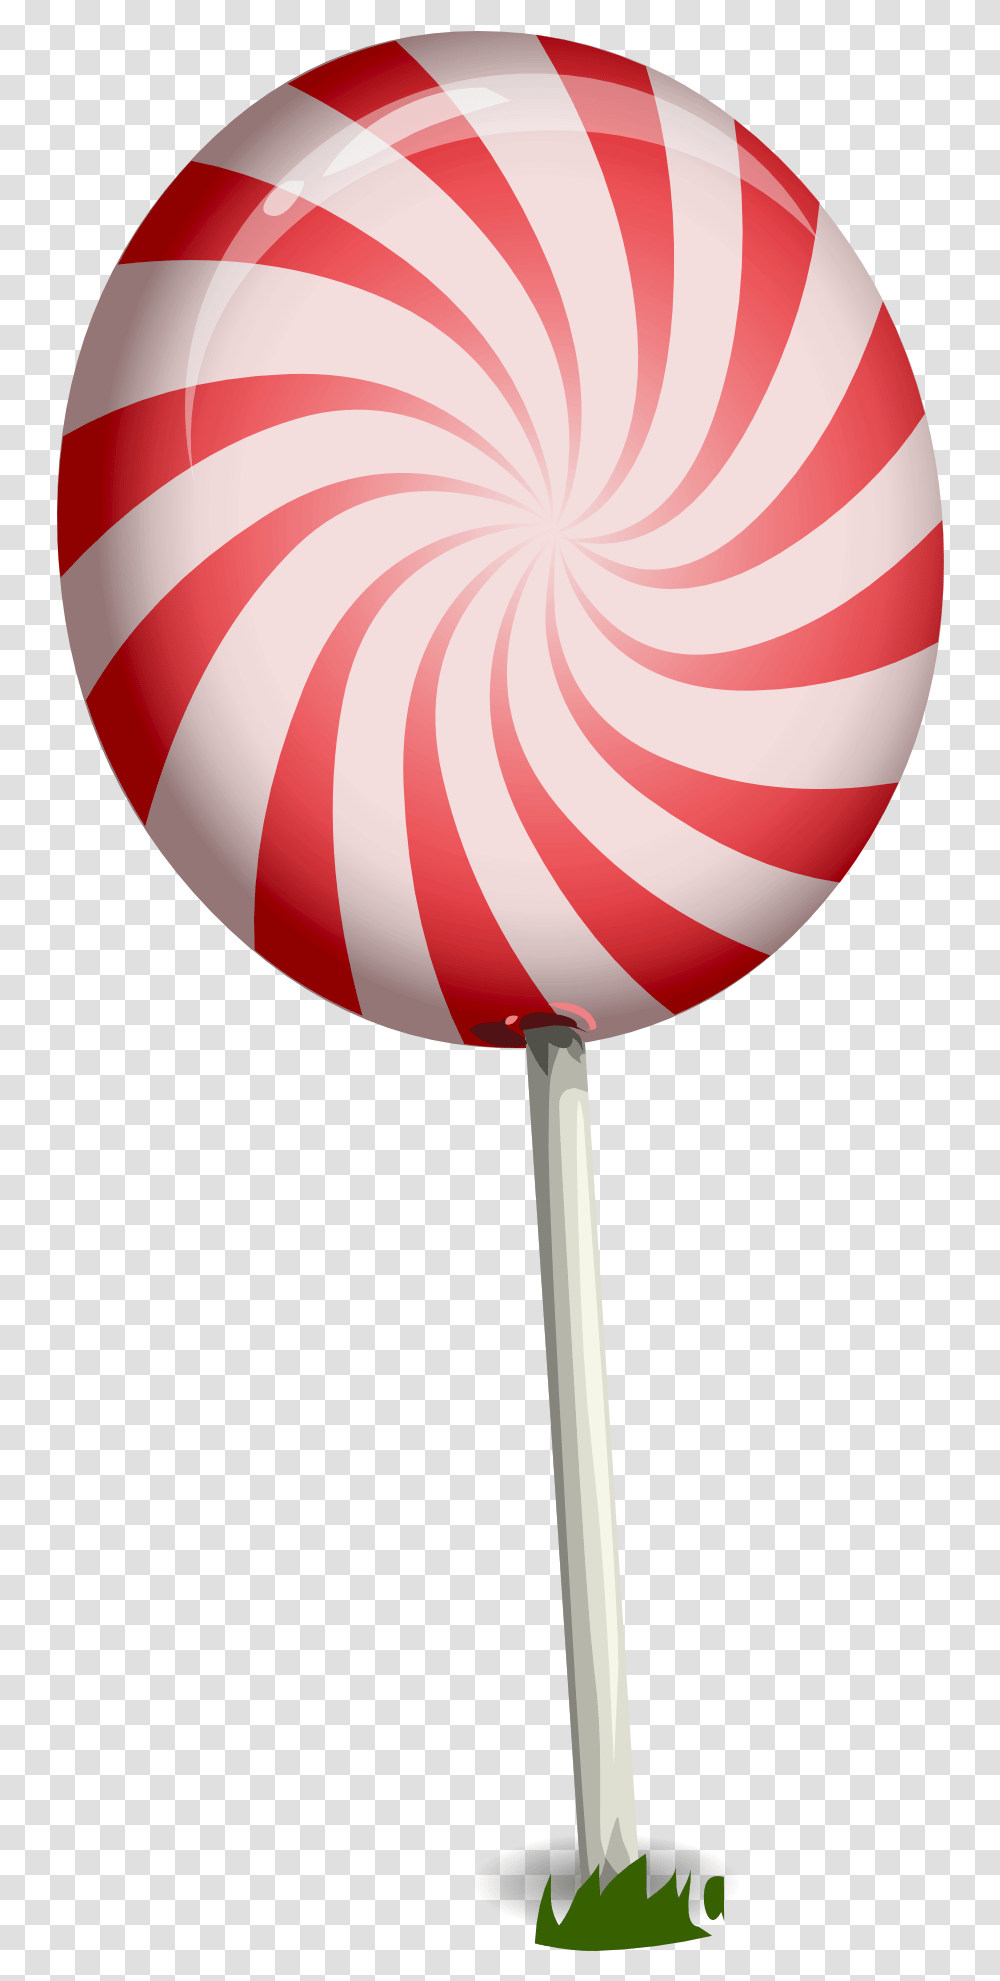 Candy Lollipop Image Candy, Food, Lamp, Balloon, Sweets Transparent Png